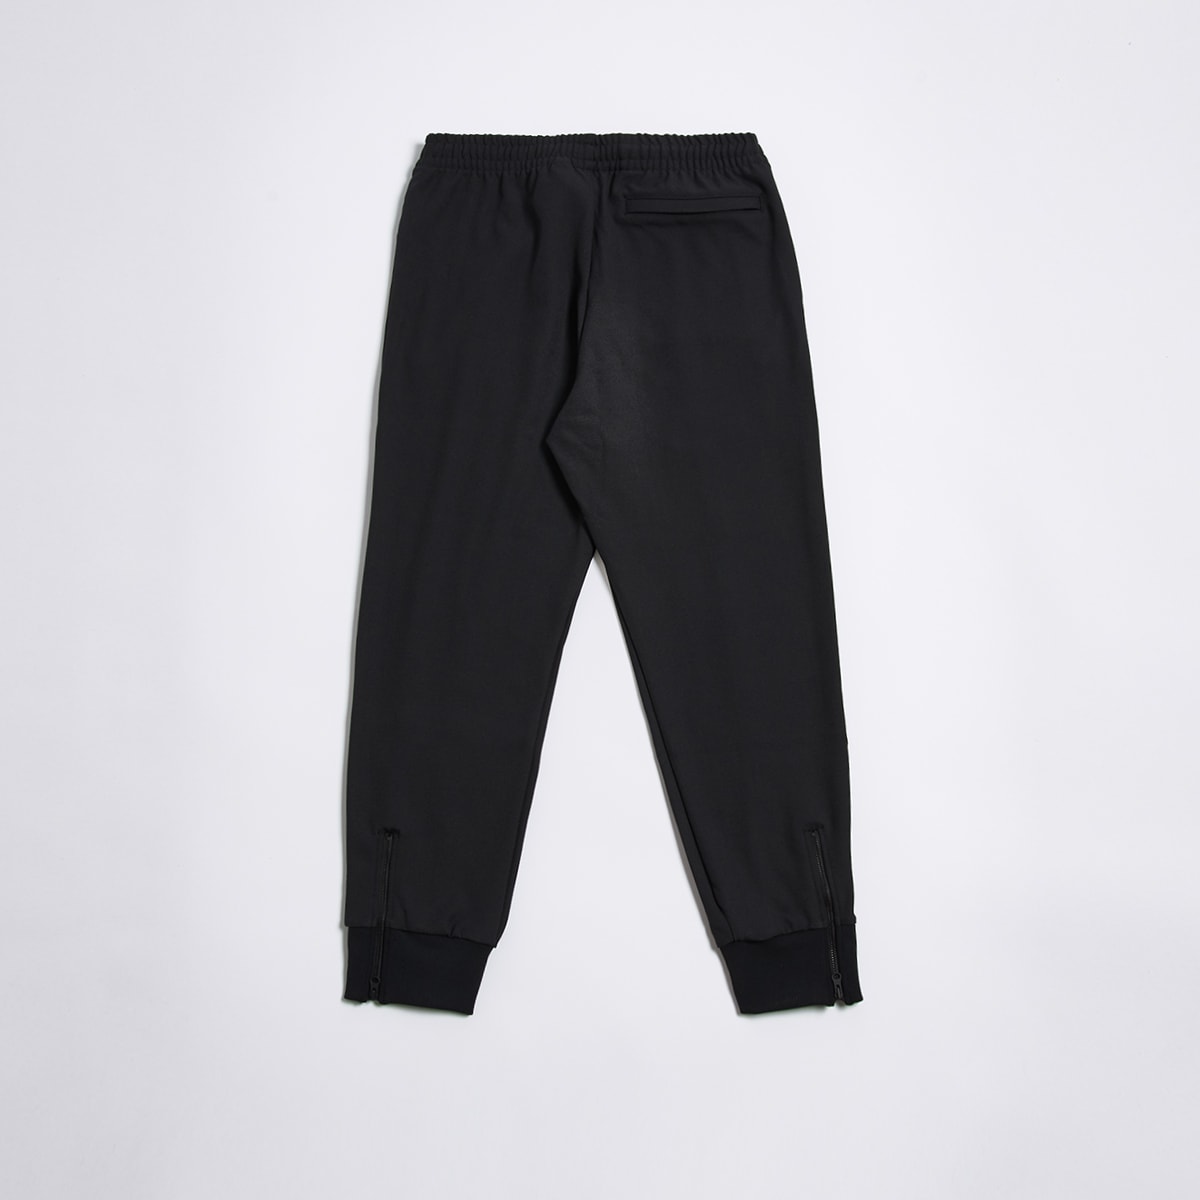 Adidas SPZL Marnach Track Pant (Black) | END. Launches